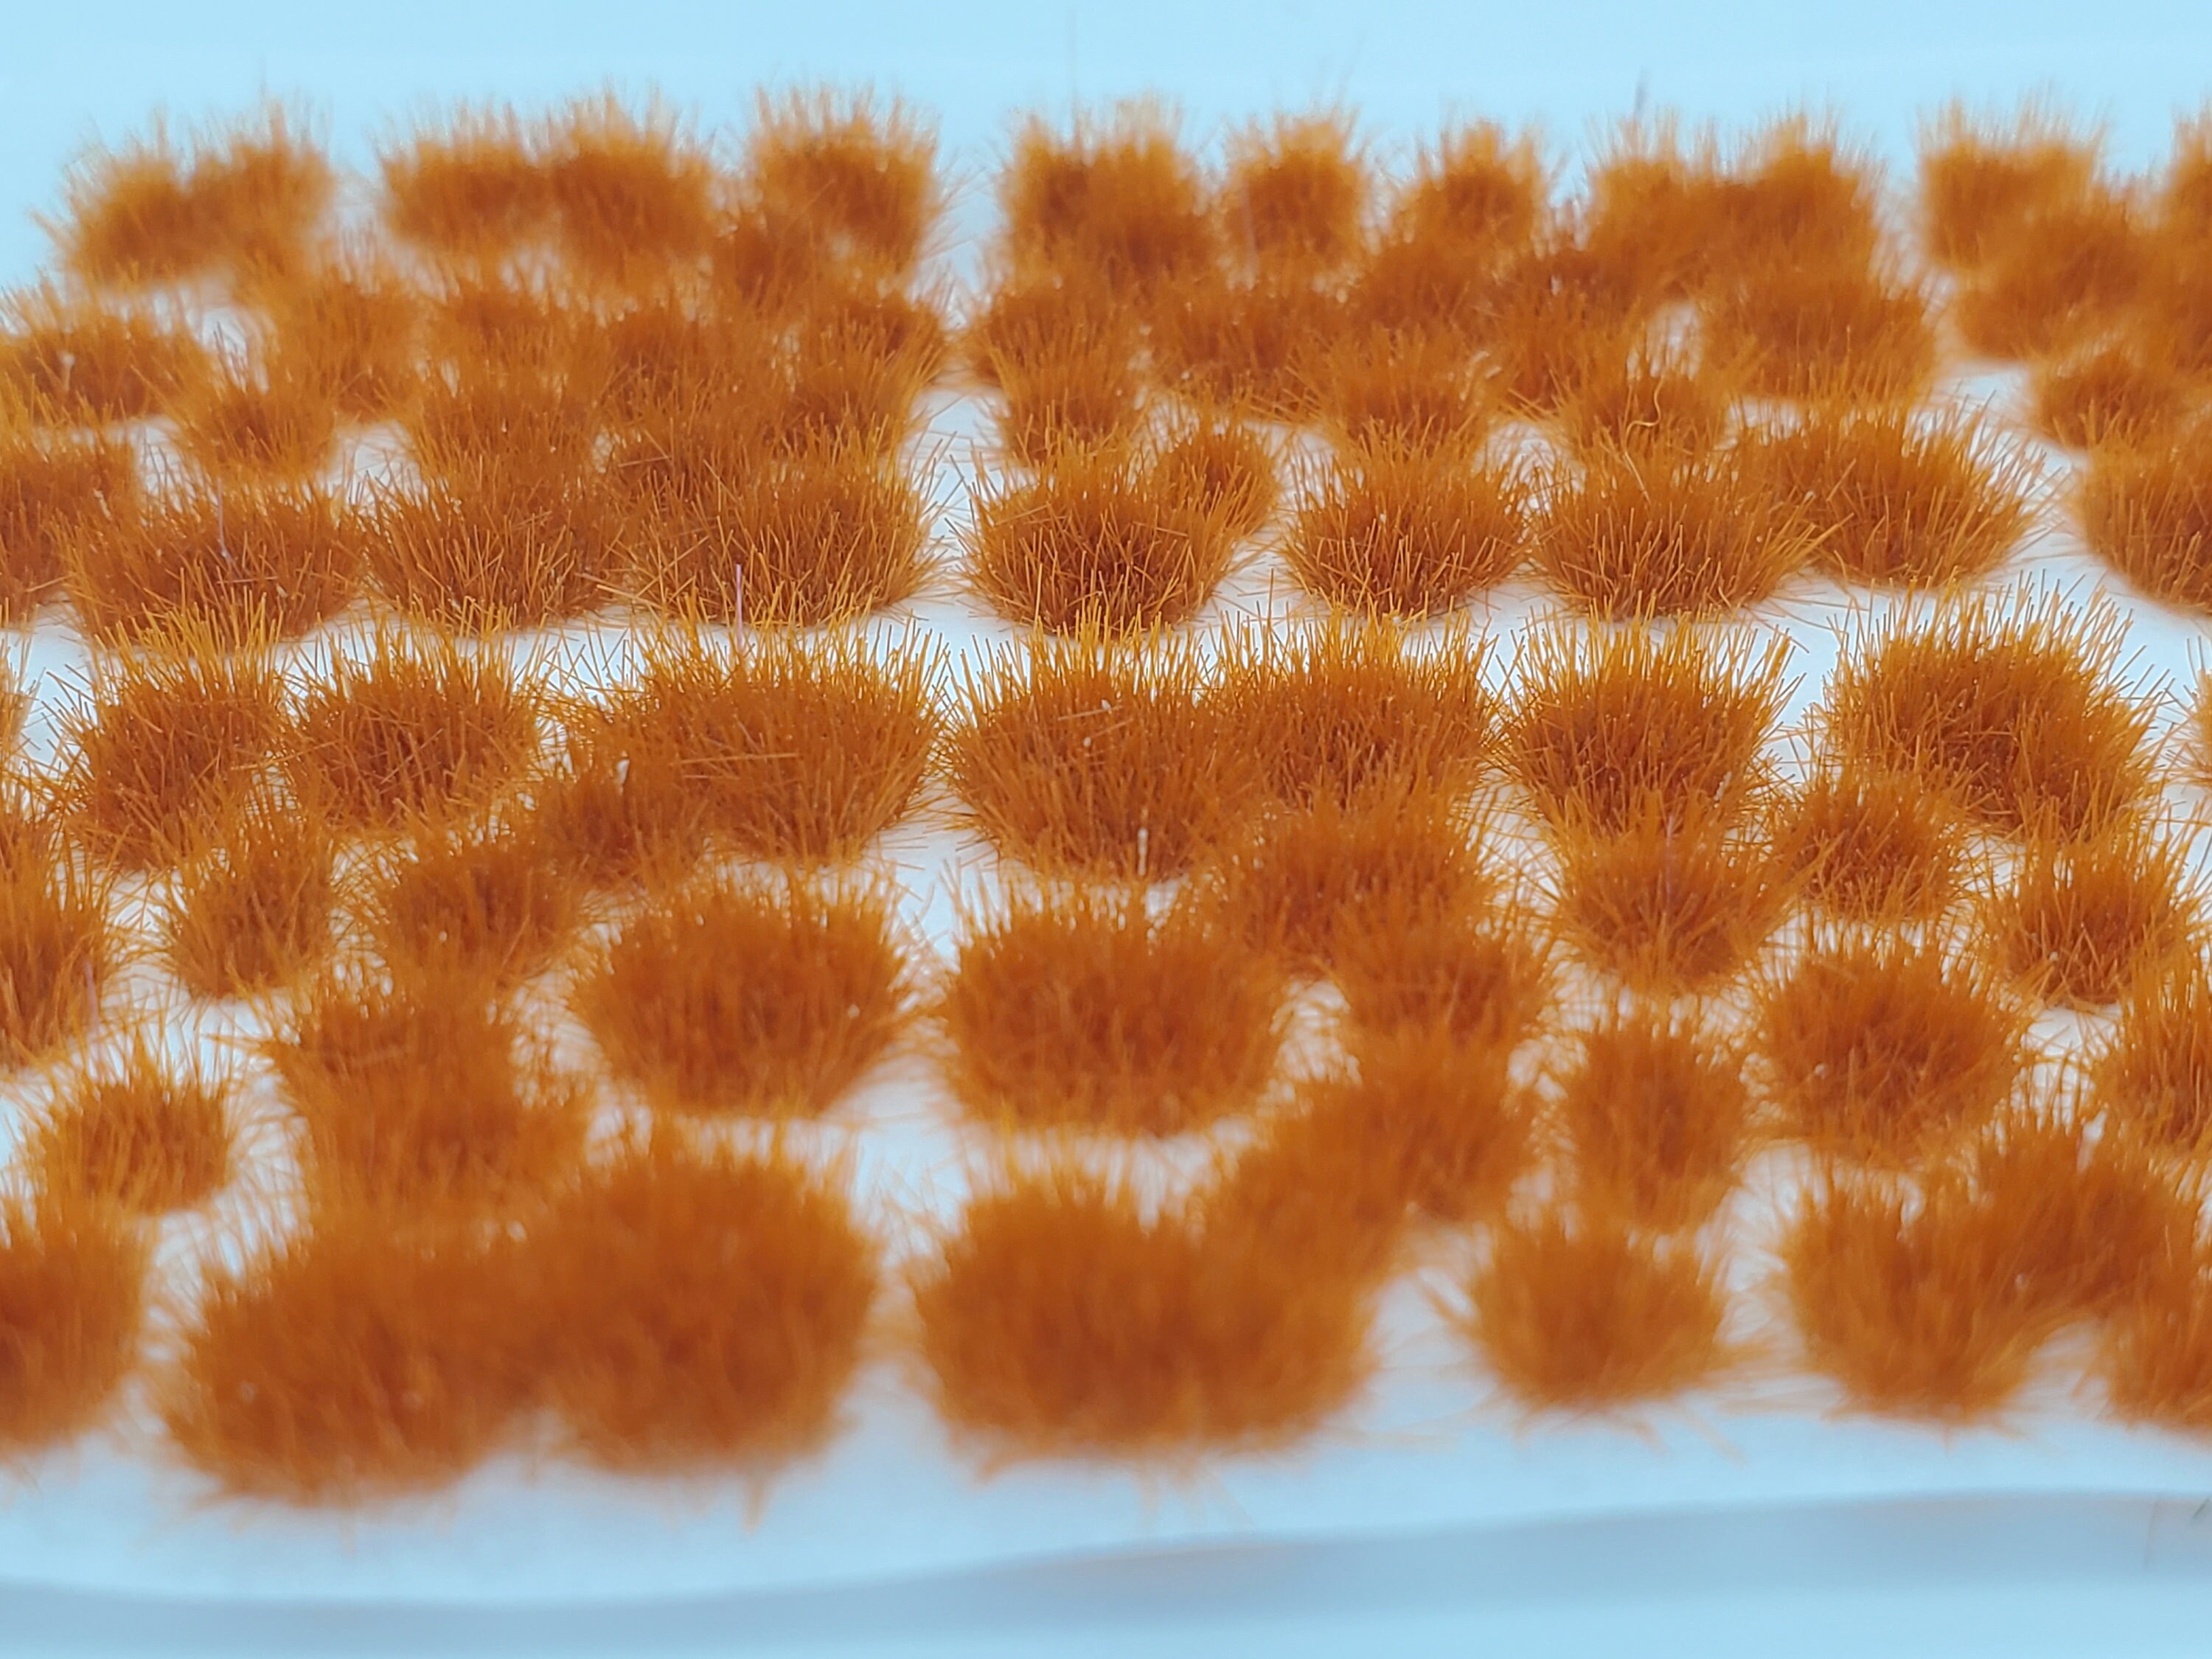 Static Grass 2mm/4mm PGS Blends 10g-1000ml Choose From 7 Sizes 